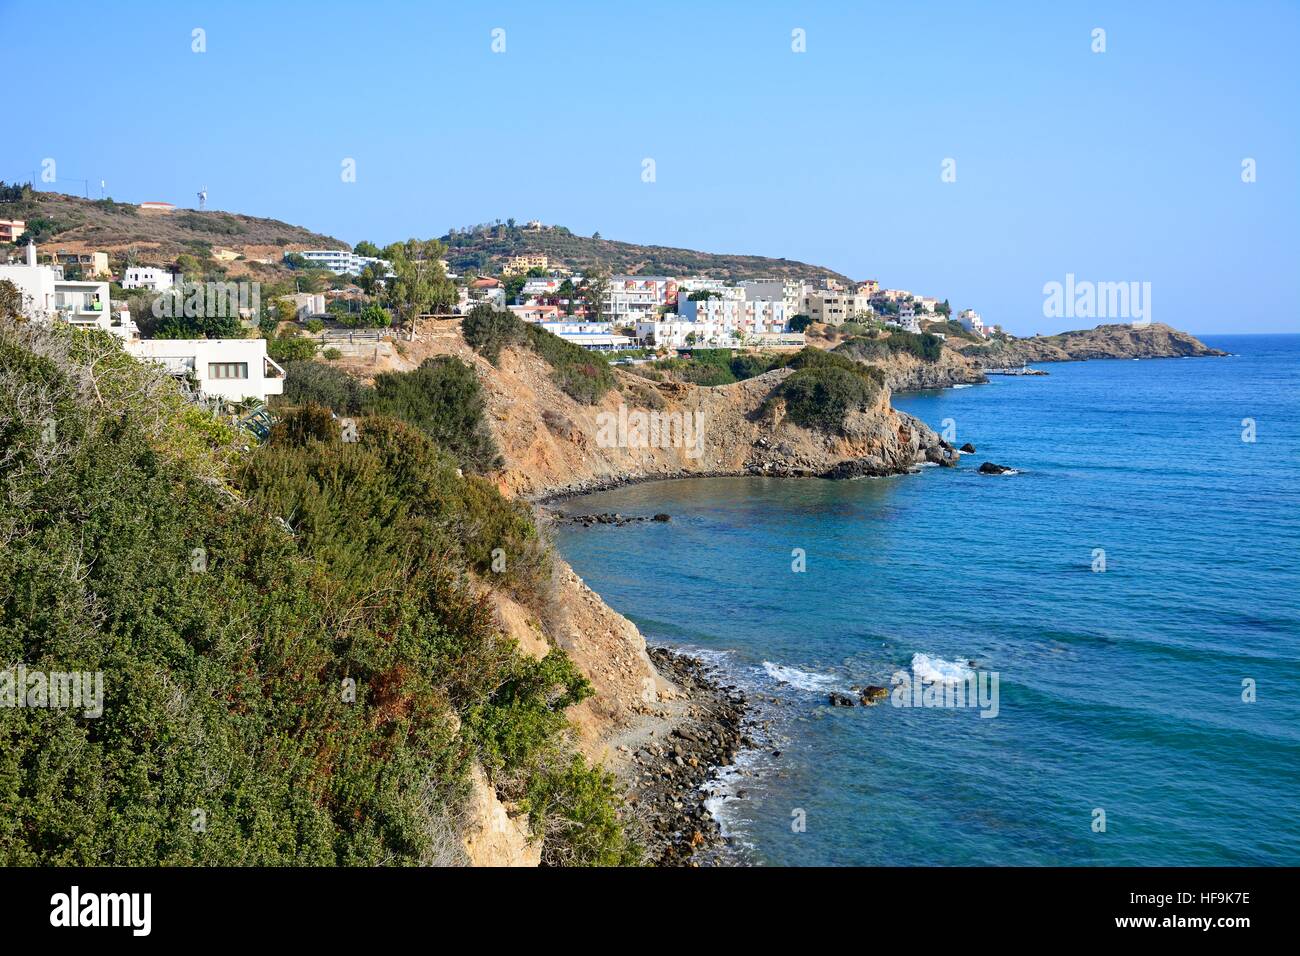 View along the rugged coastline with hotels and apartments to the rear, Bali, Crete, Greece, Europe. Stock Photo